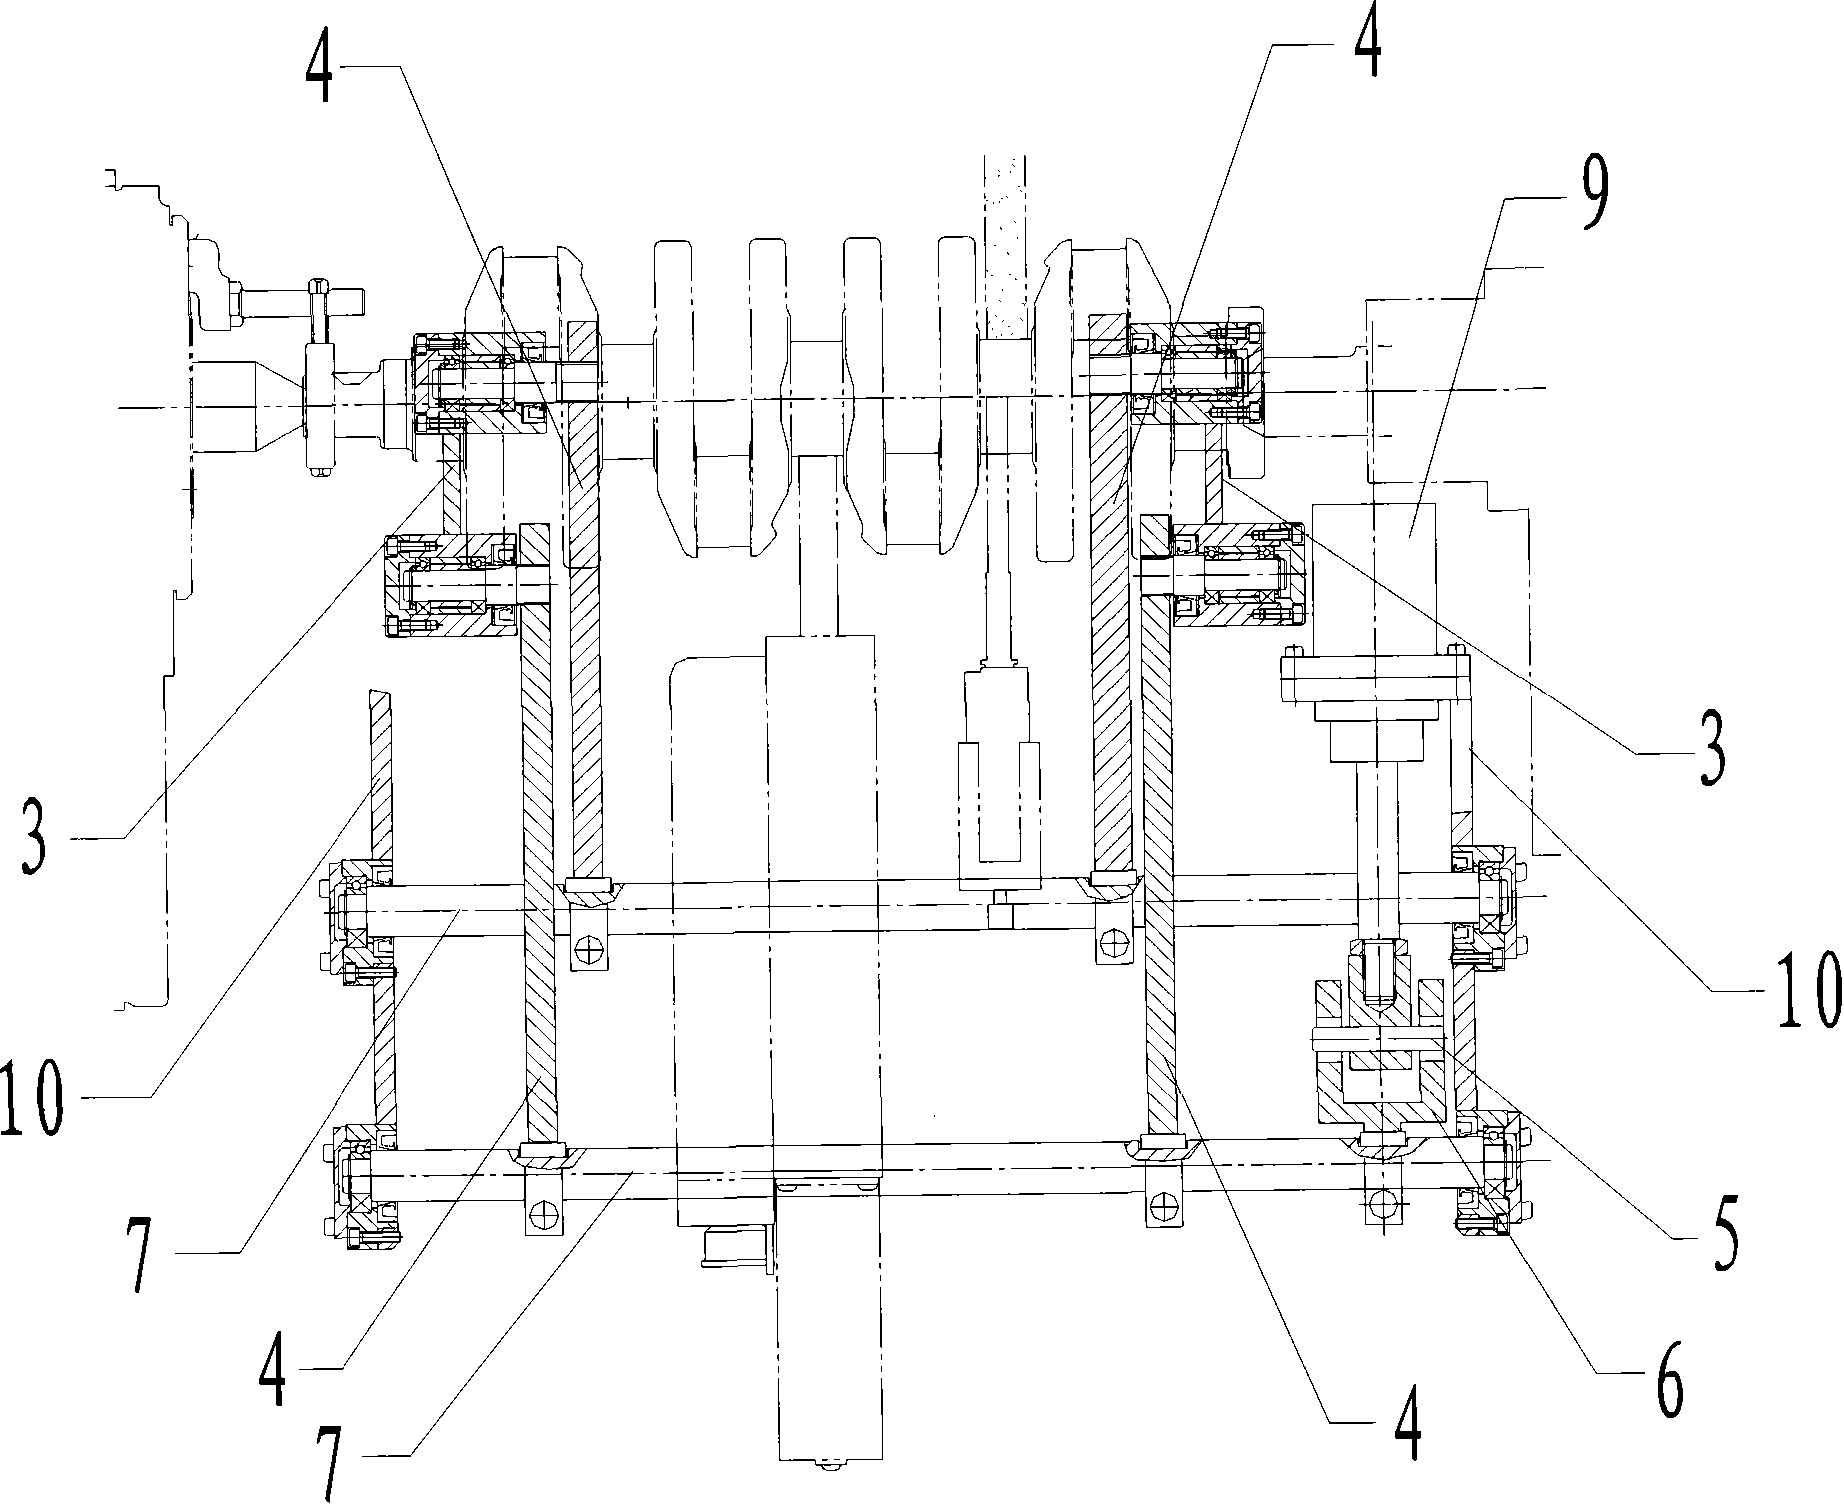 Automatic loading and unloading device aiming at crankshaft